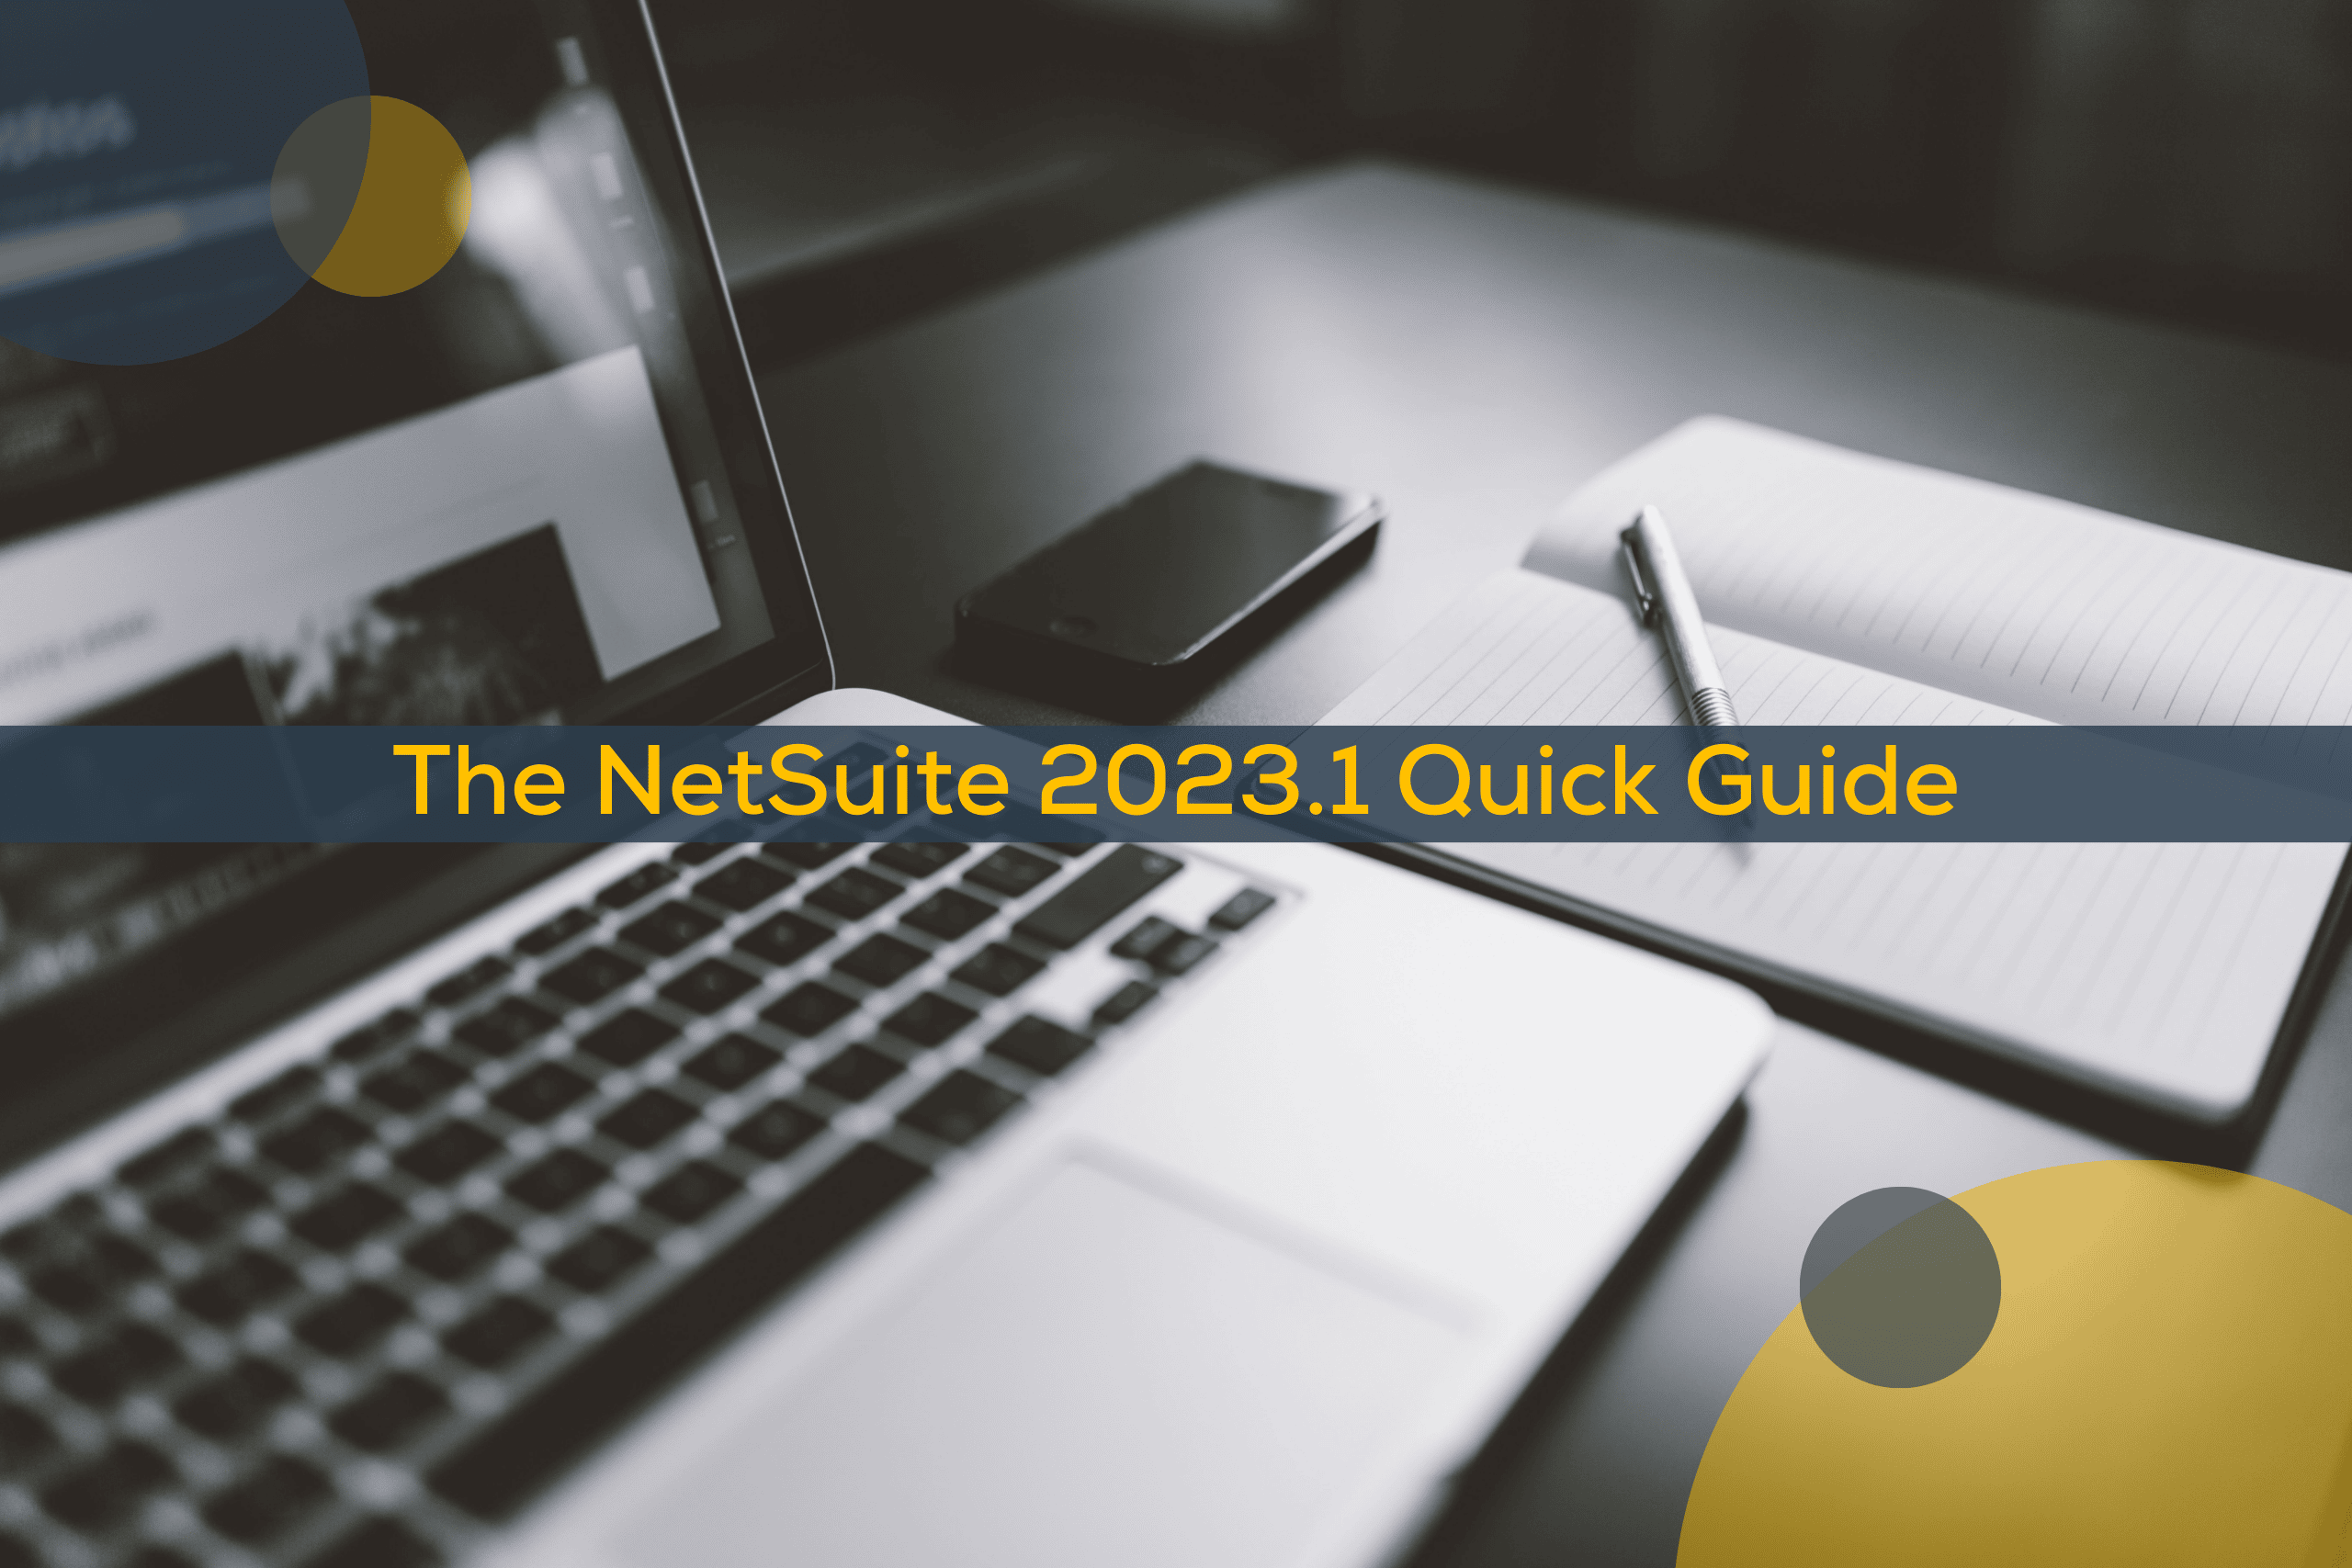 The NetSuite 2023.1 Quick Guide